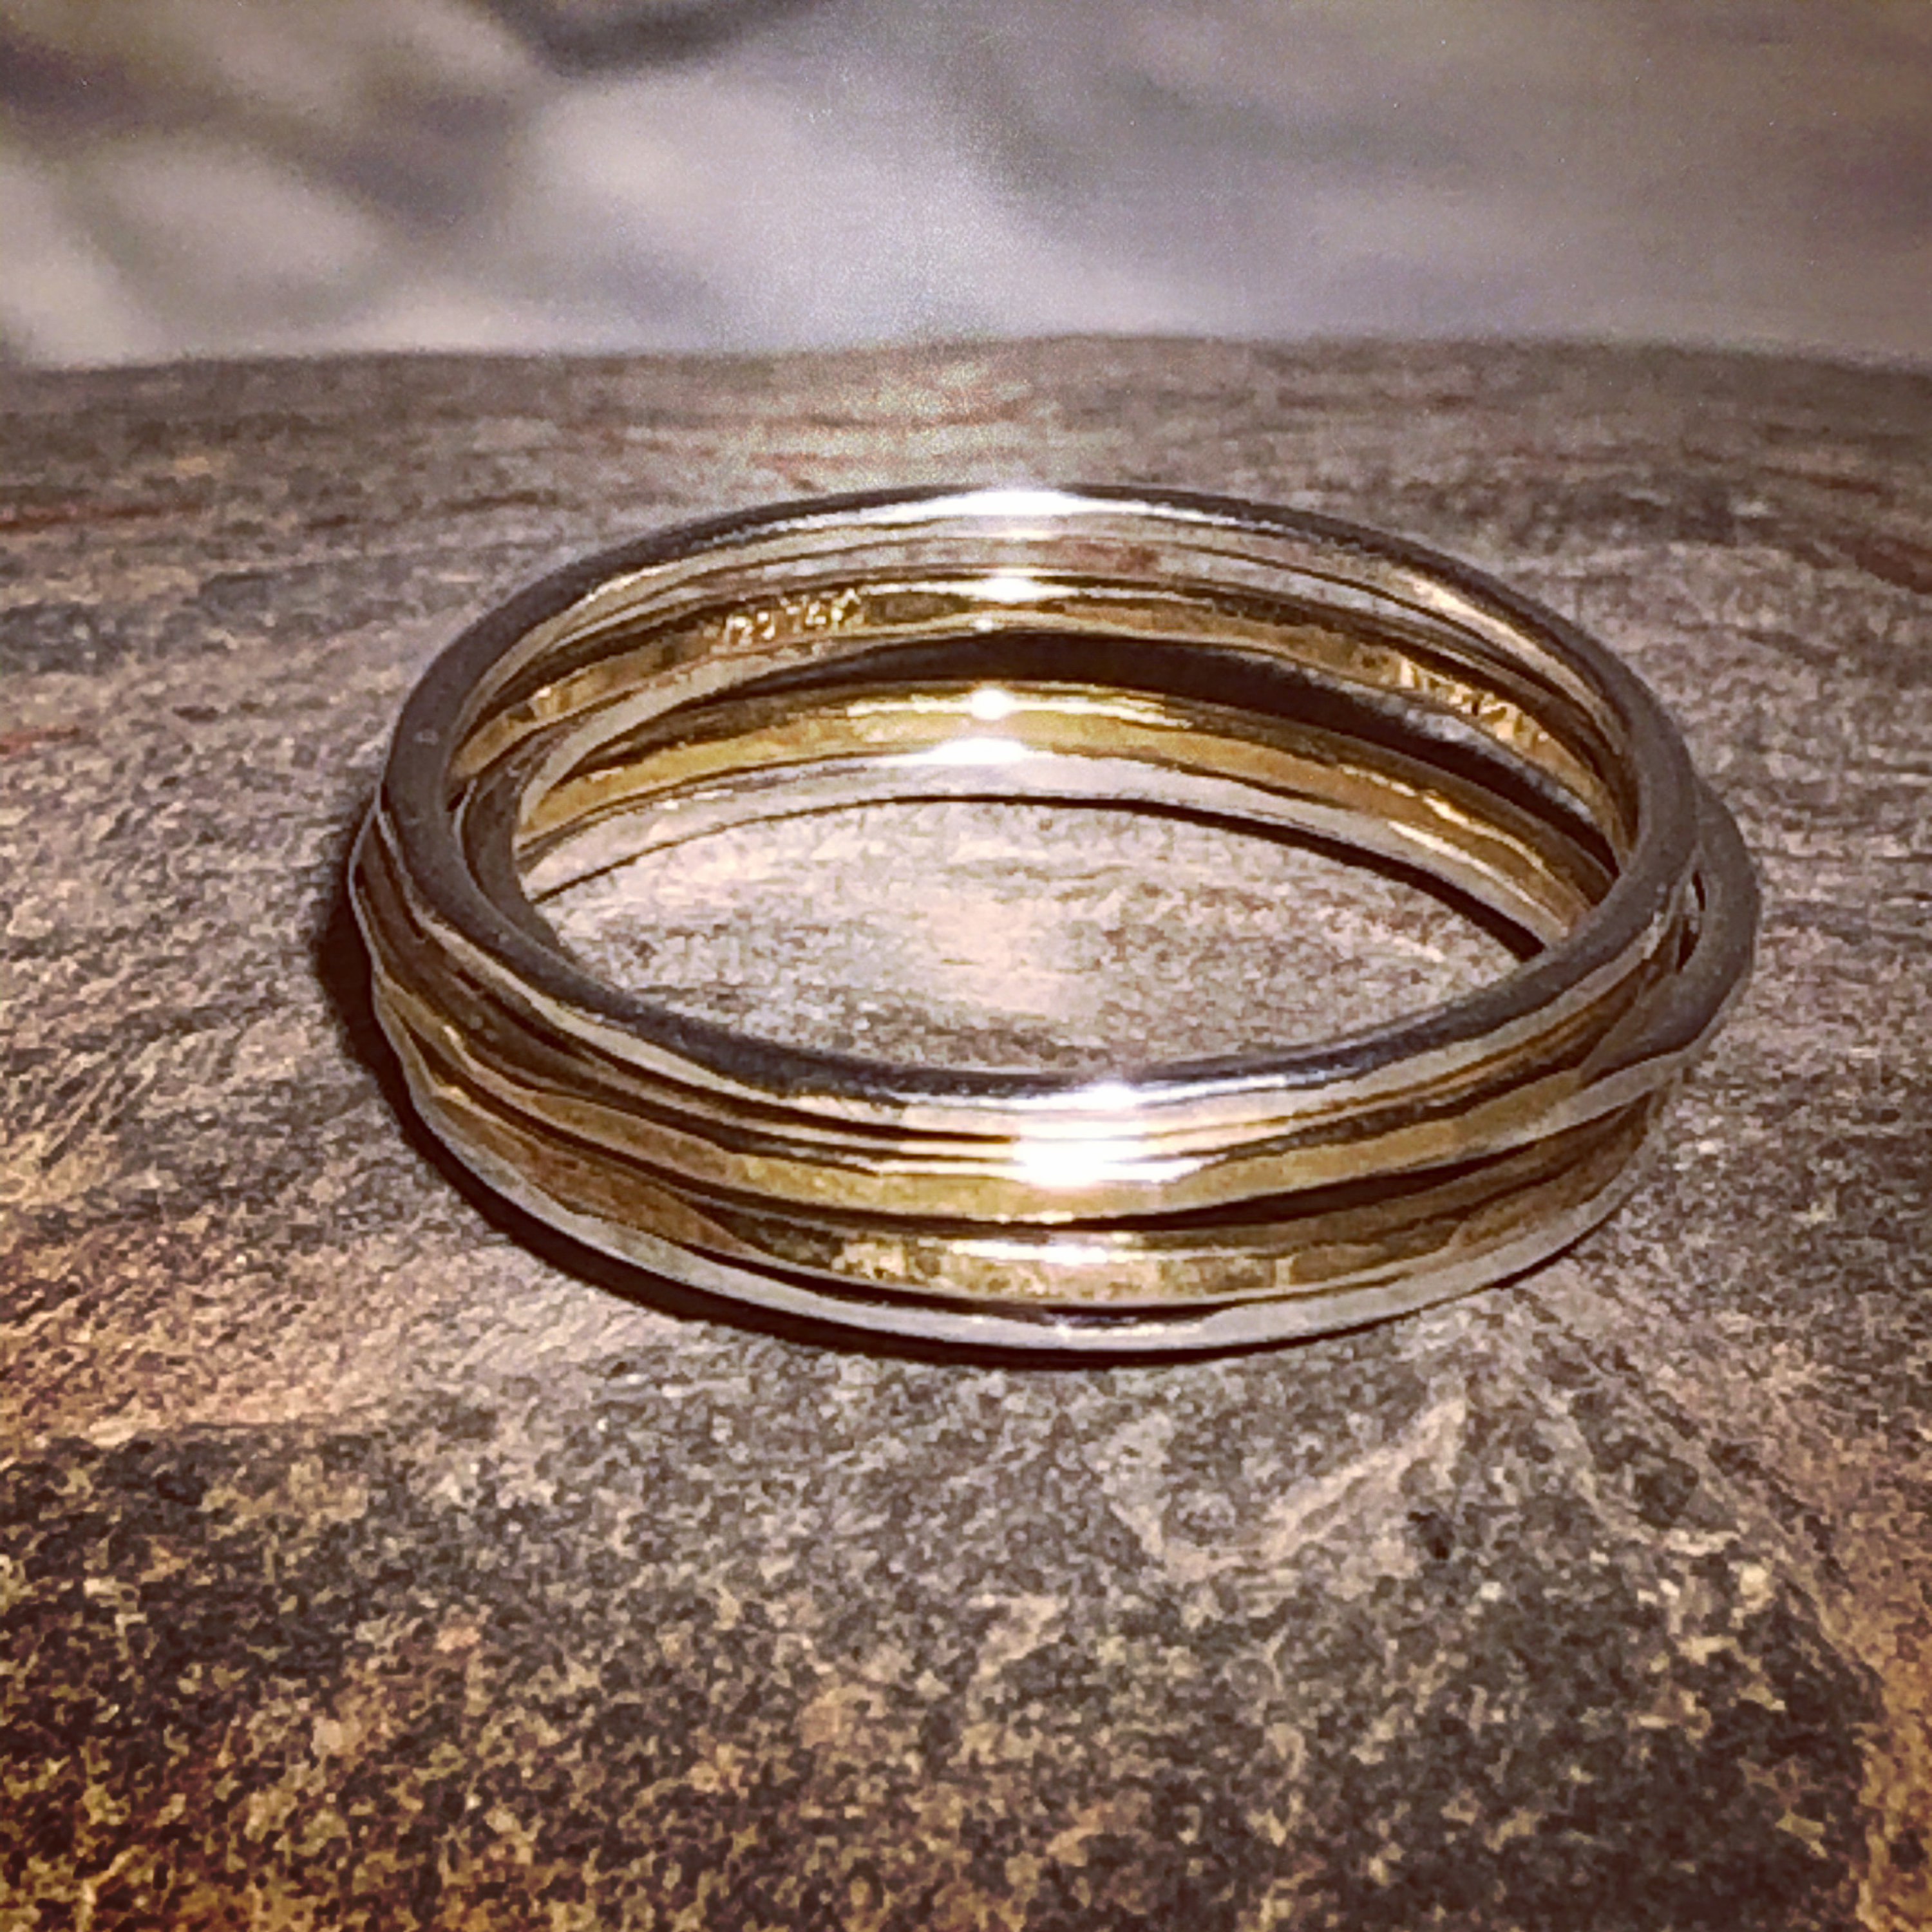 Silver and gold stacking ring set. | Etsy